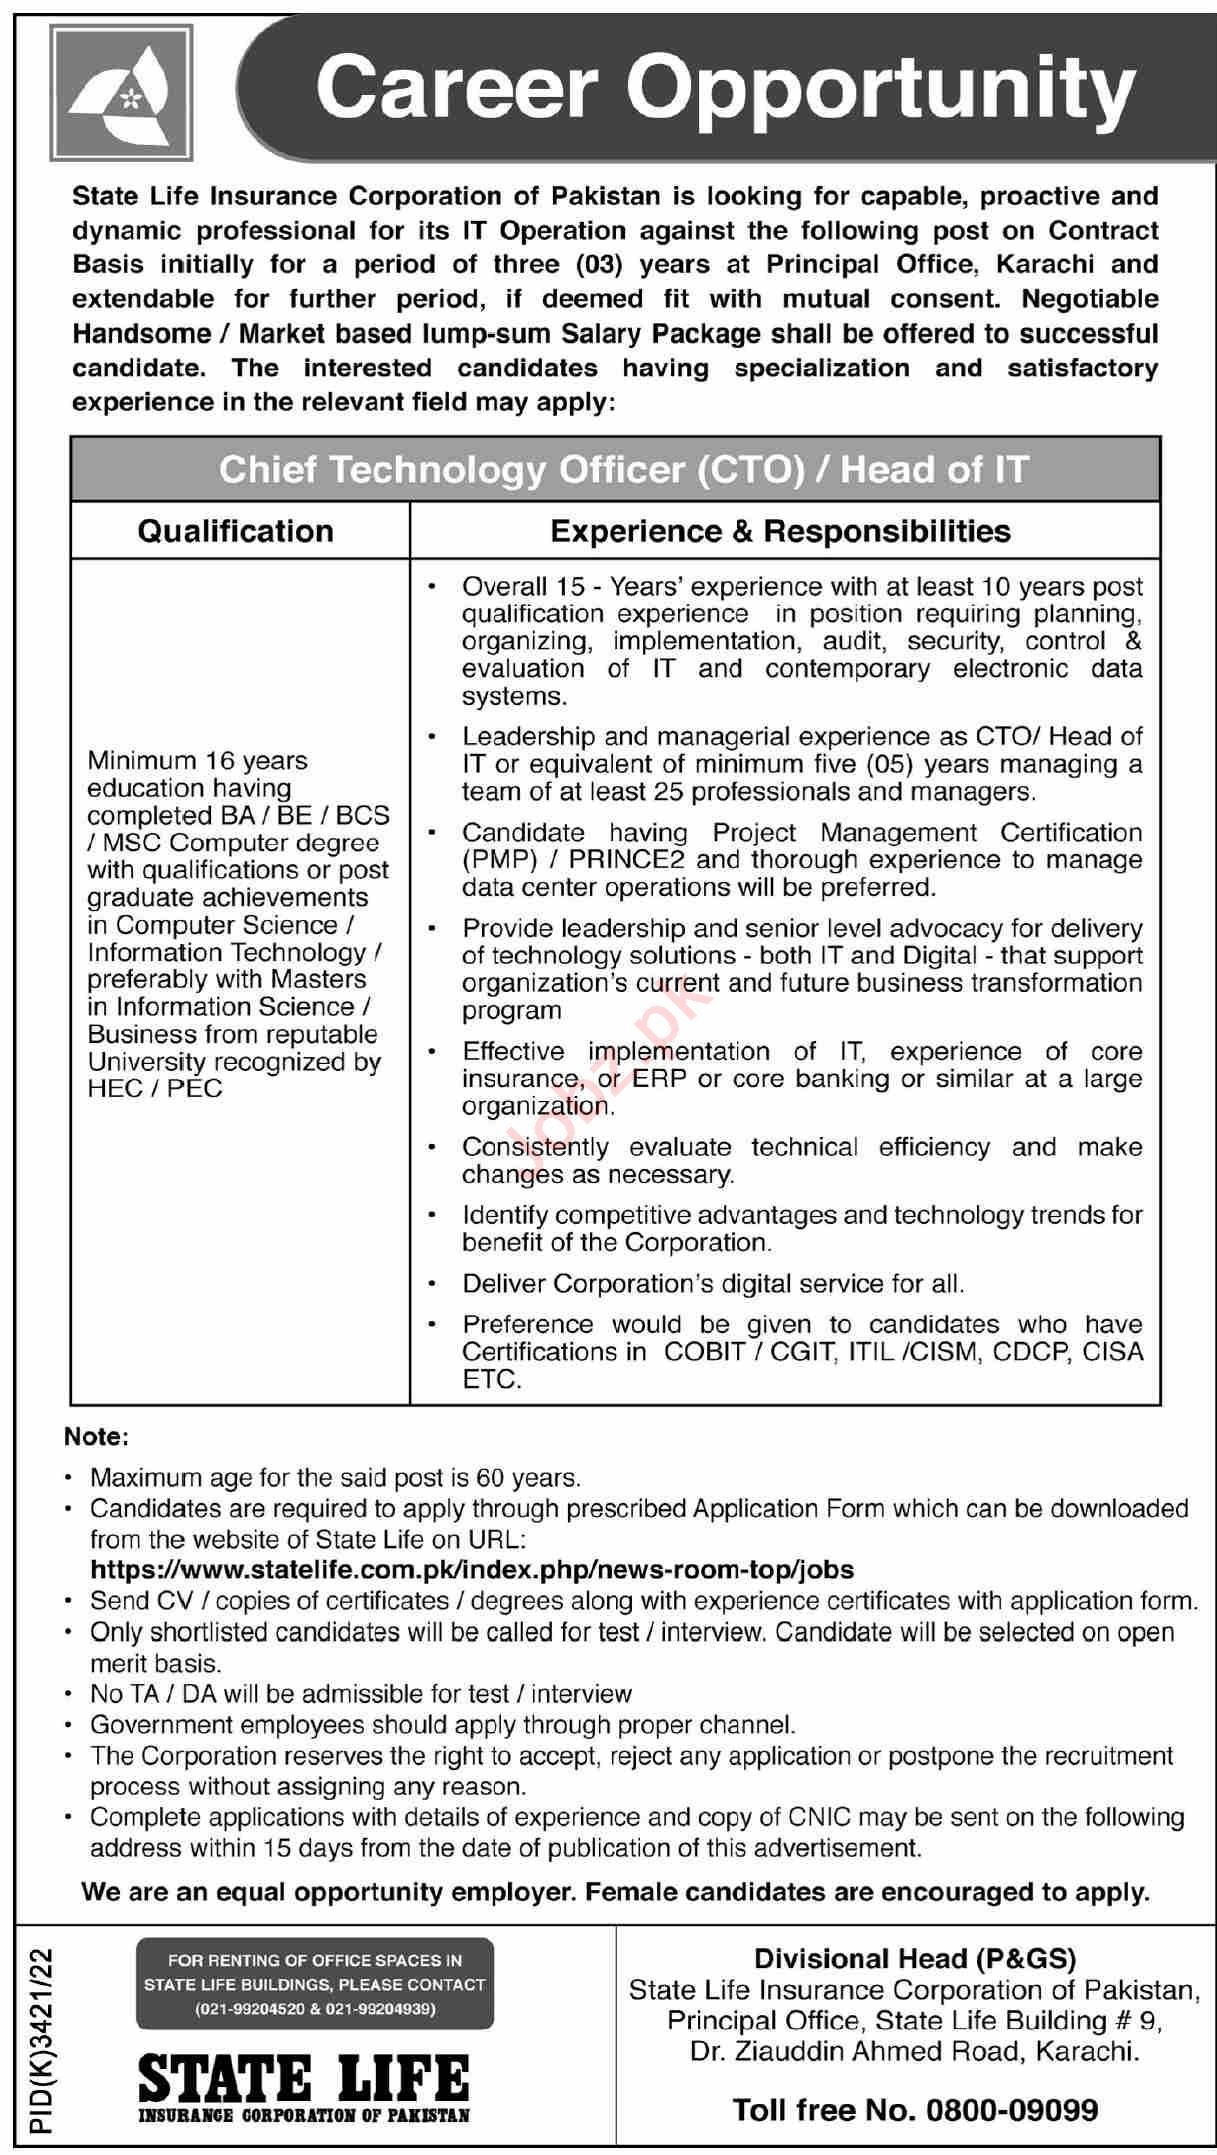 Jobs in State Life Insurance Corporation of Pakistan